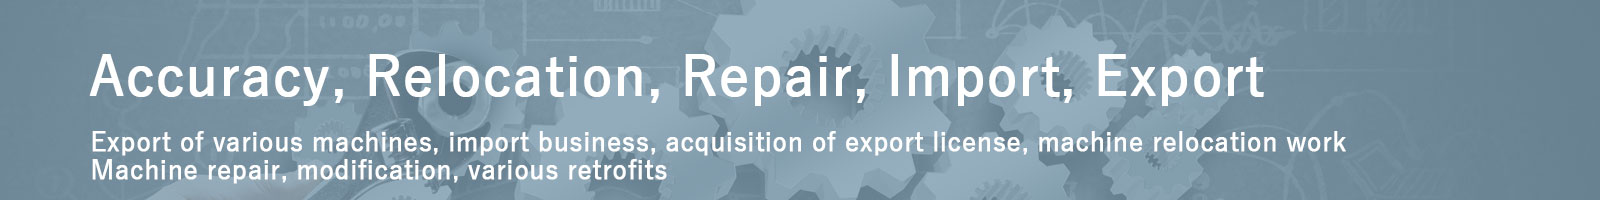 Accuracy, Relocation, Repair, Import and Export